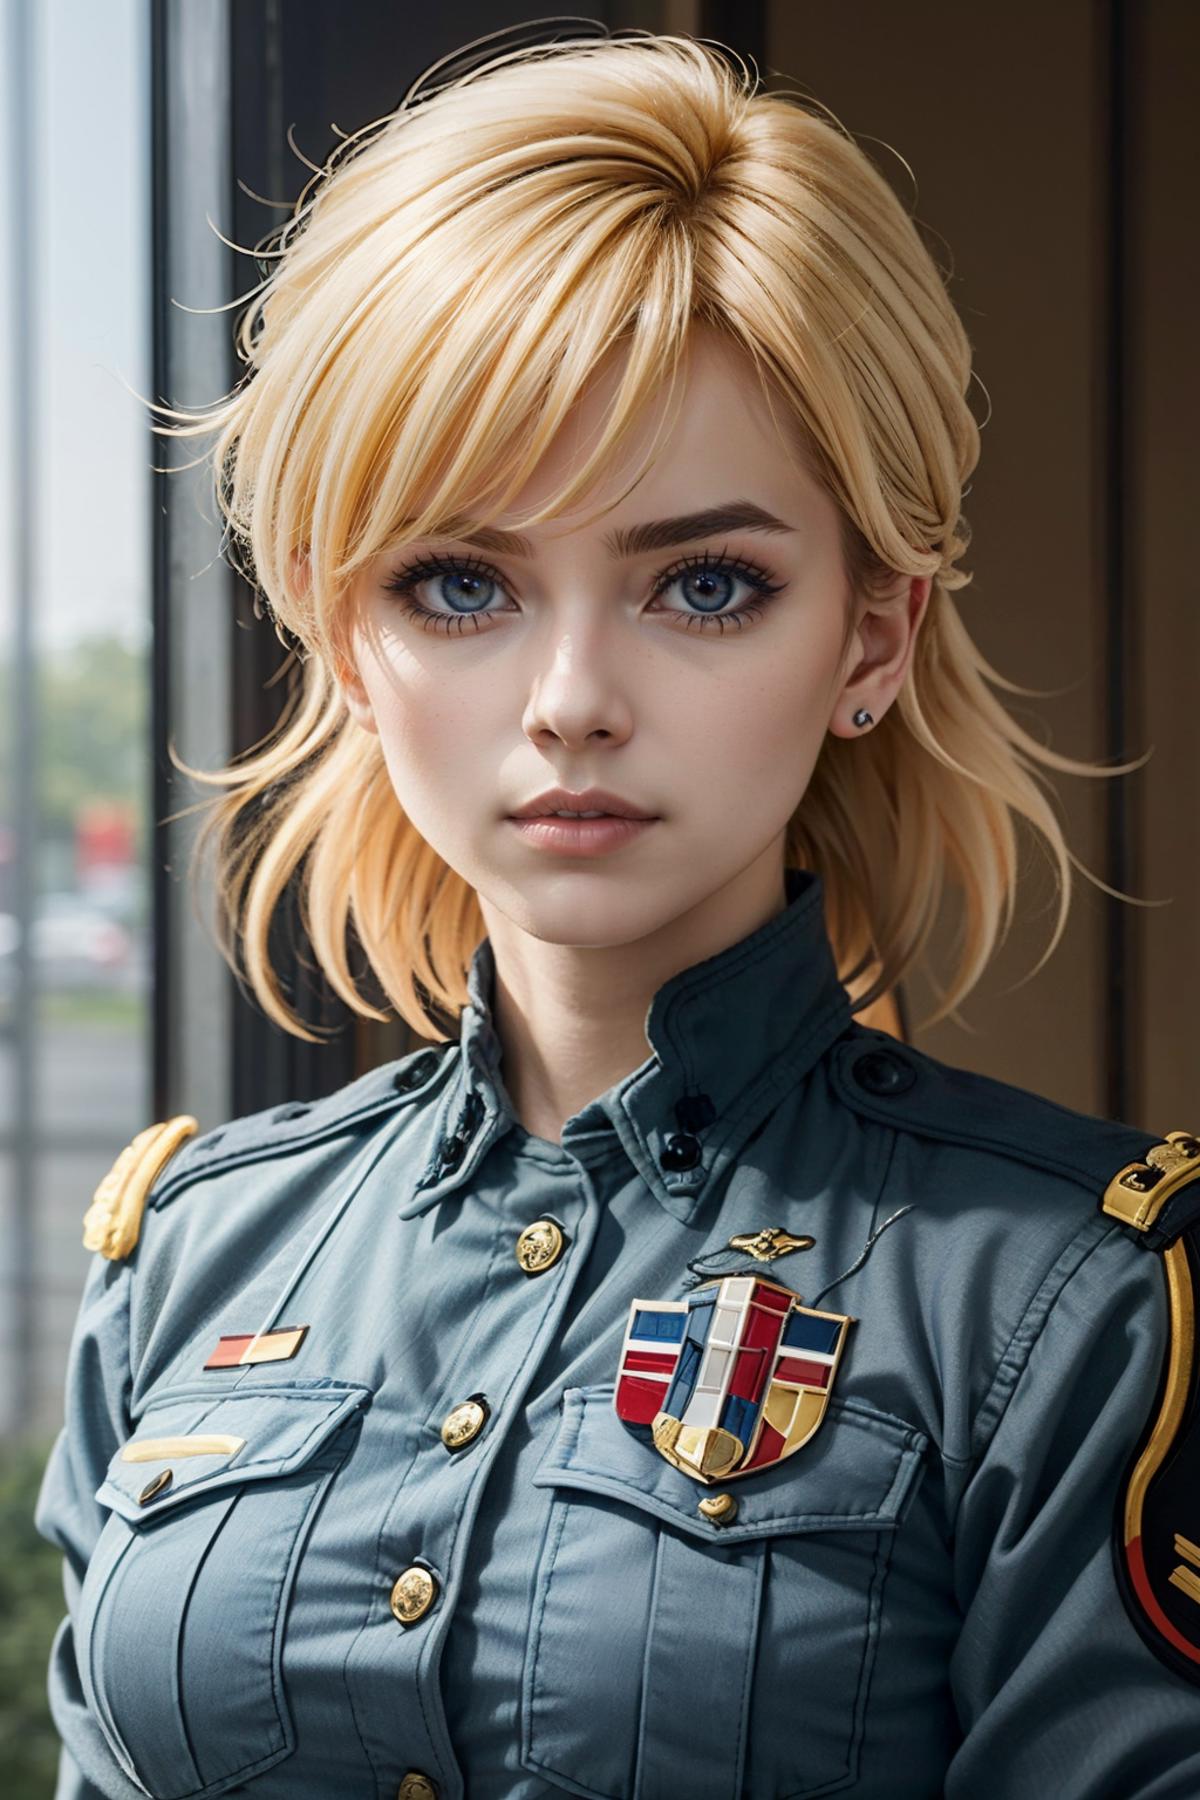 A young woman with blonde hair wearing a military uniform.